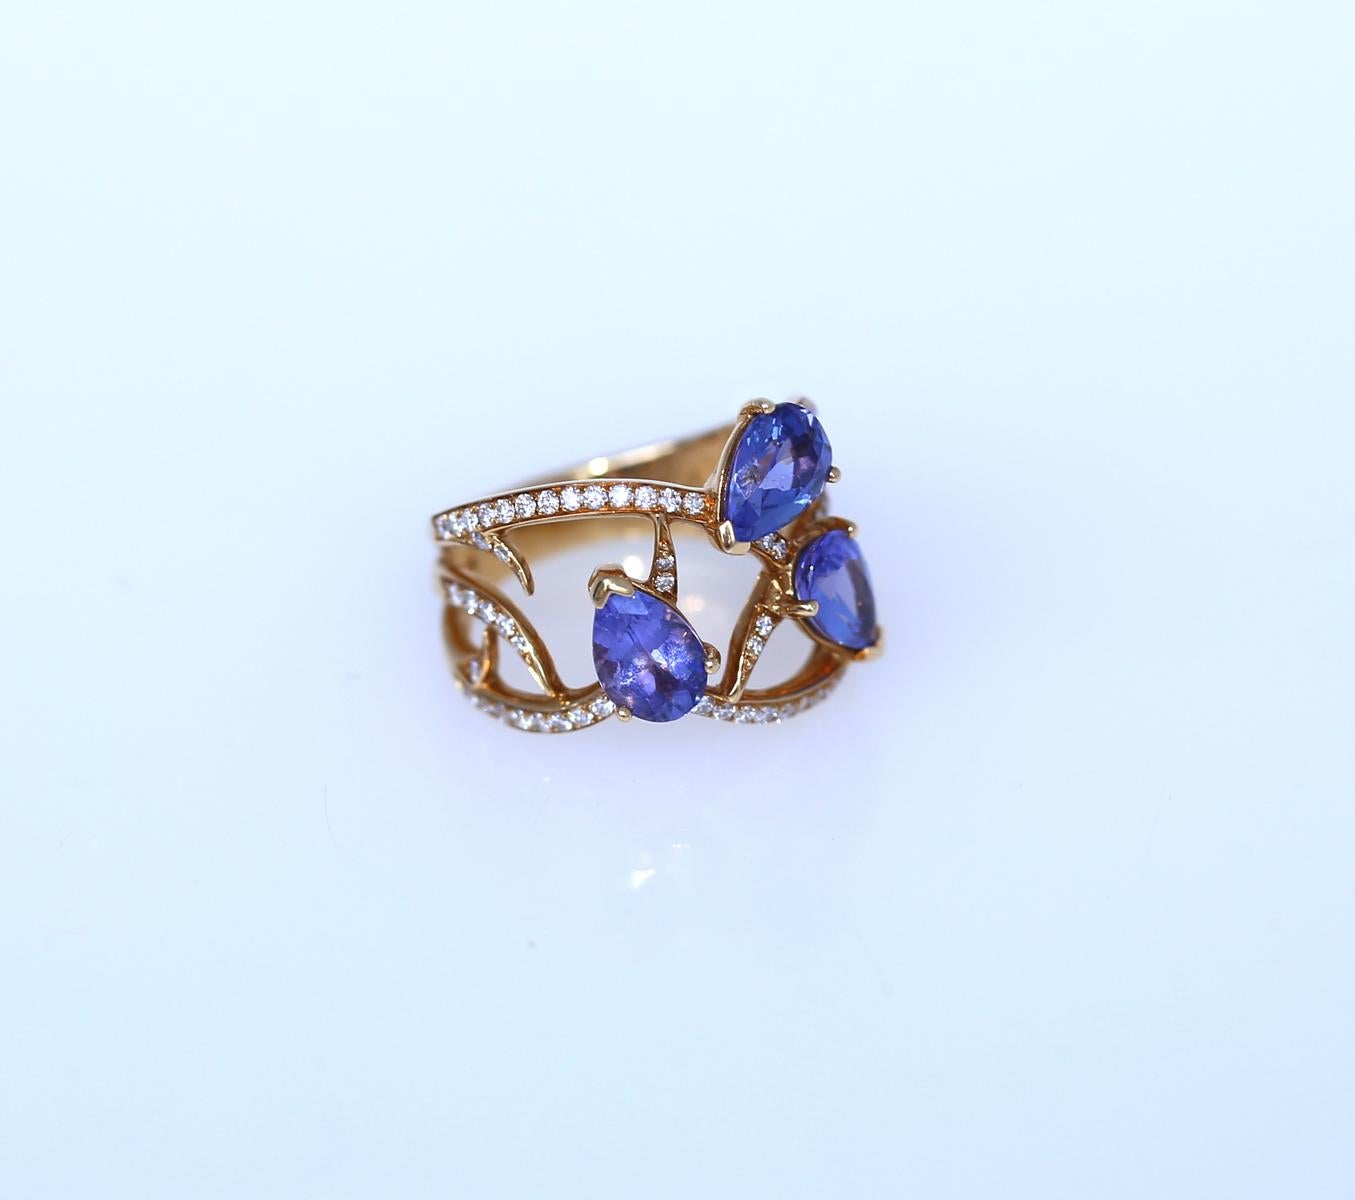 Pear Cut Stephen Webster Tanzanite Diamonds Ring Signed Yellow Gold 18K, 2010 For Sale